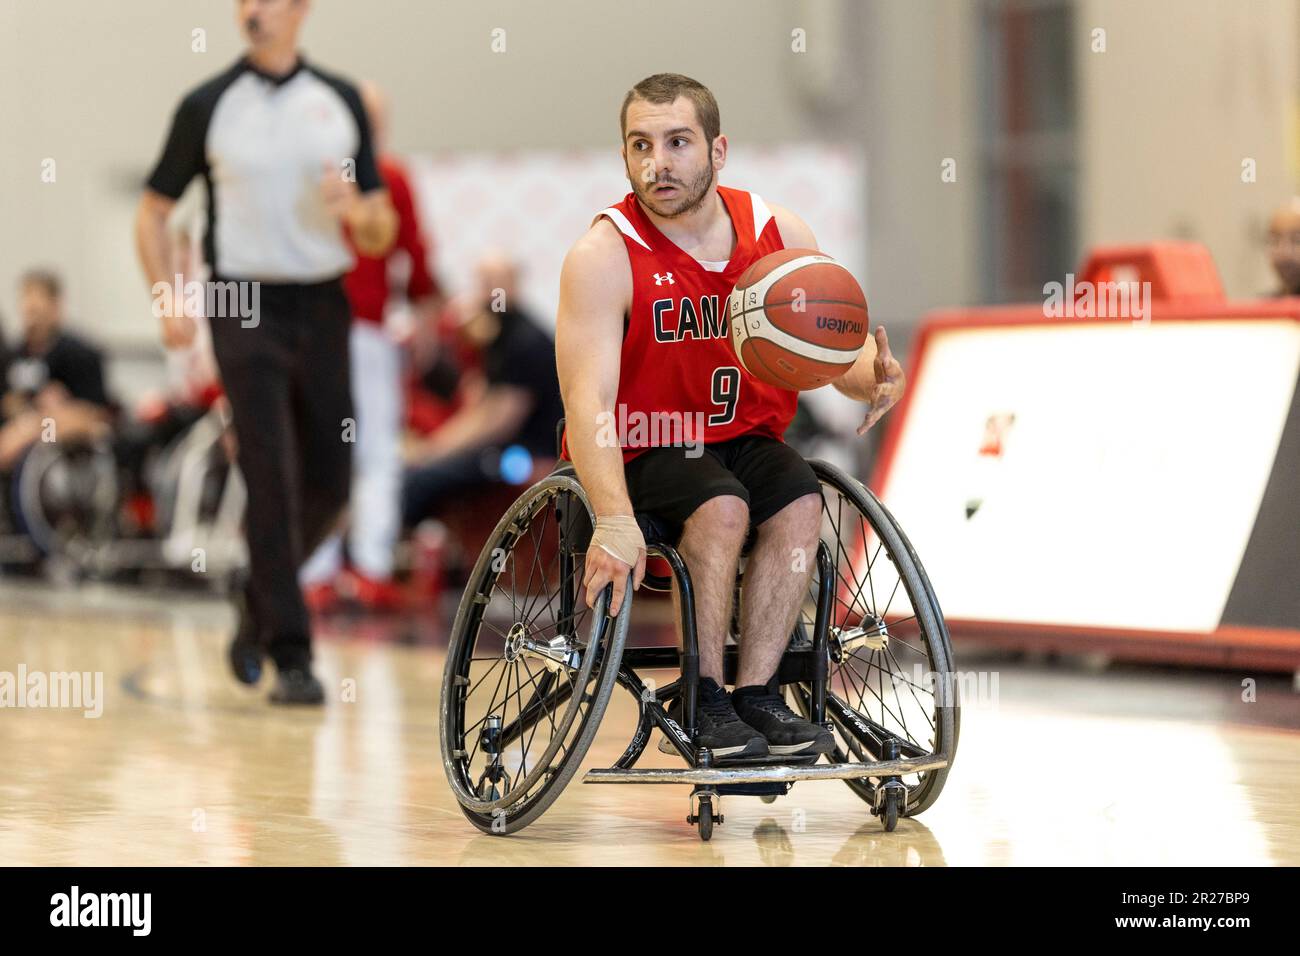 Ottawa, Canada. 17 May 2023. Collin Lalonde (9) of the Canada Men's wheelchair basketball team in men’s wheelchair basketball action in the Canada development squad versus the Netherlands national team in the Ottawa Invitational Tournament at Carleton University. Copyright 2023 Sean Burges / Mundo Sport Images / Alamo Live News. Stock Photo